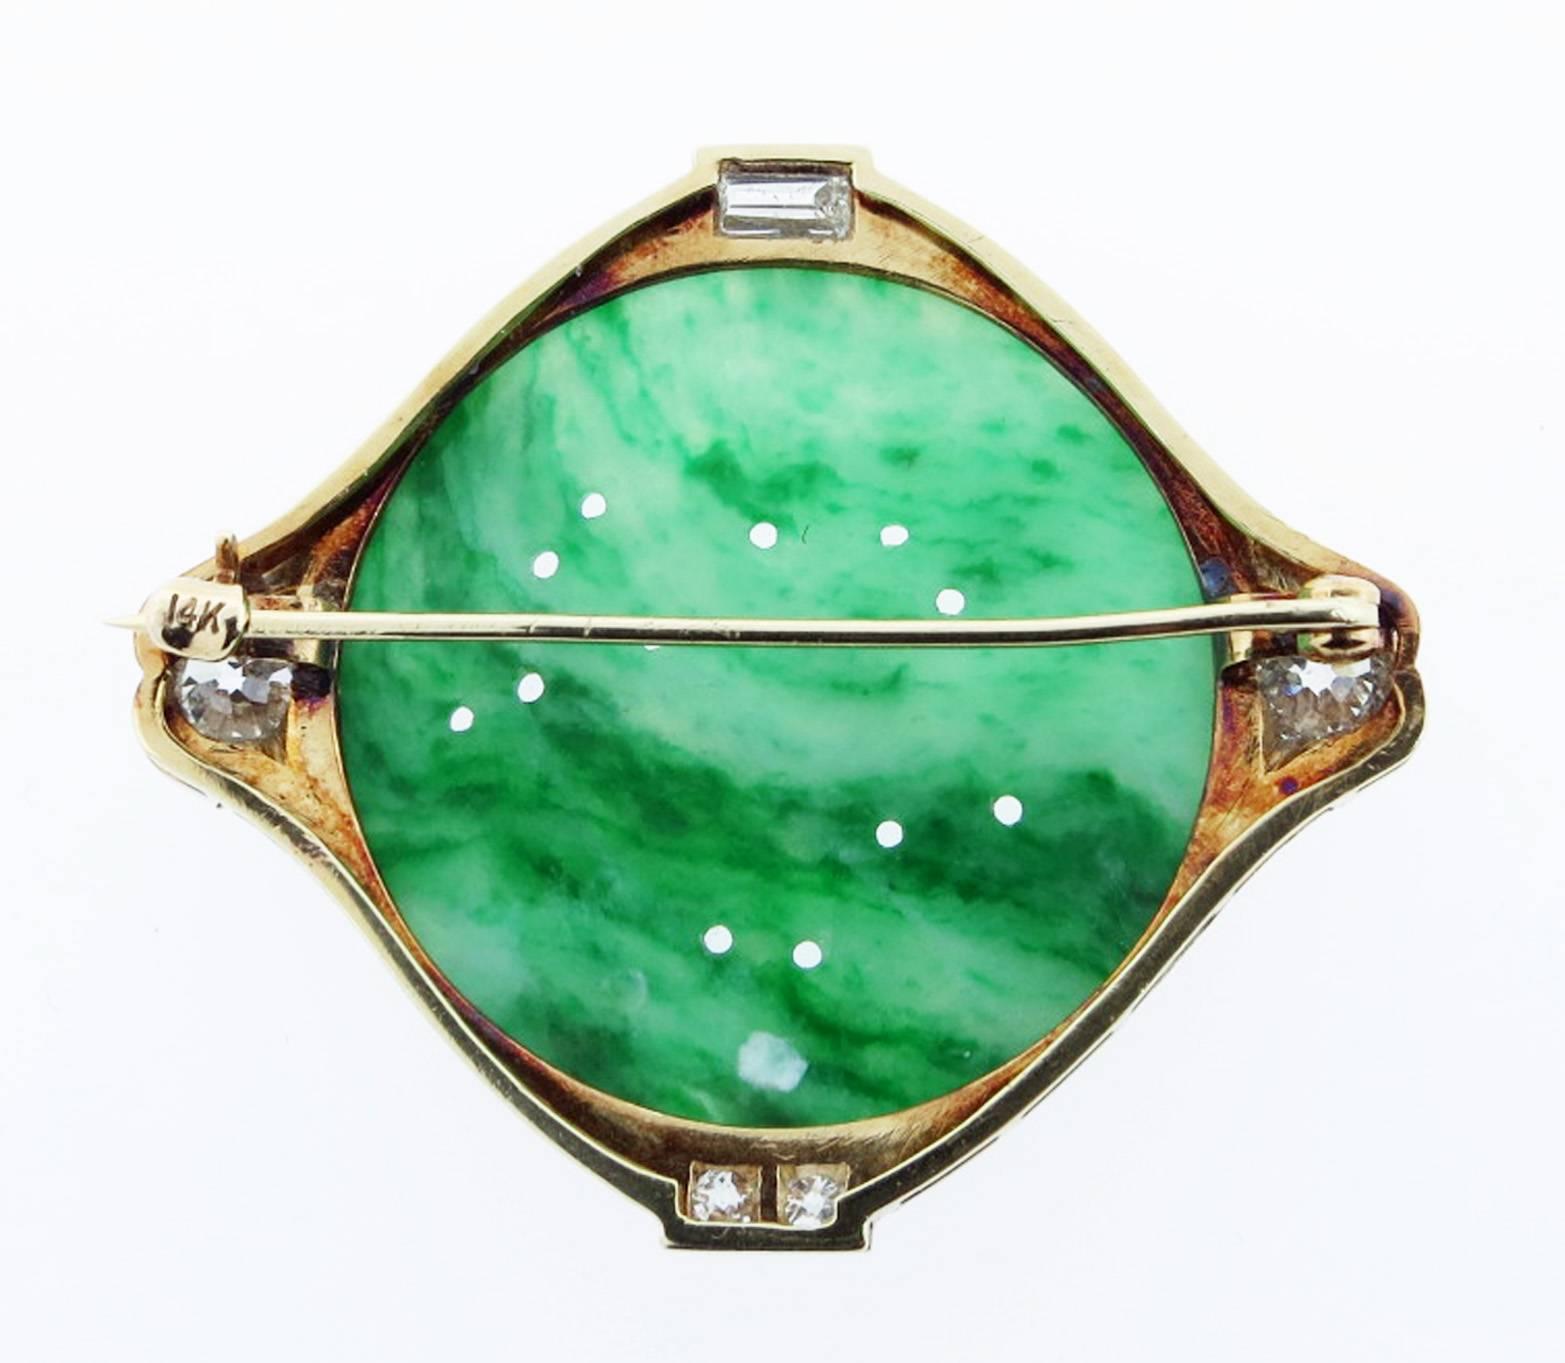 Handmade 14kt. yellow gold beautifully engraved mount jade brooch with a carved bird motif. The brooch measures 1 3/4 inches and is mounted in mill grained white gold with a round European cut diamond on each side totaling  approx .70cts. Set north